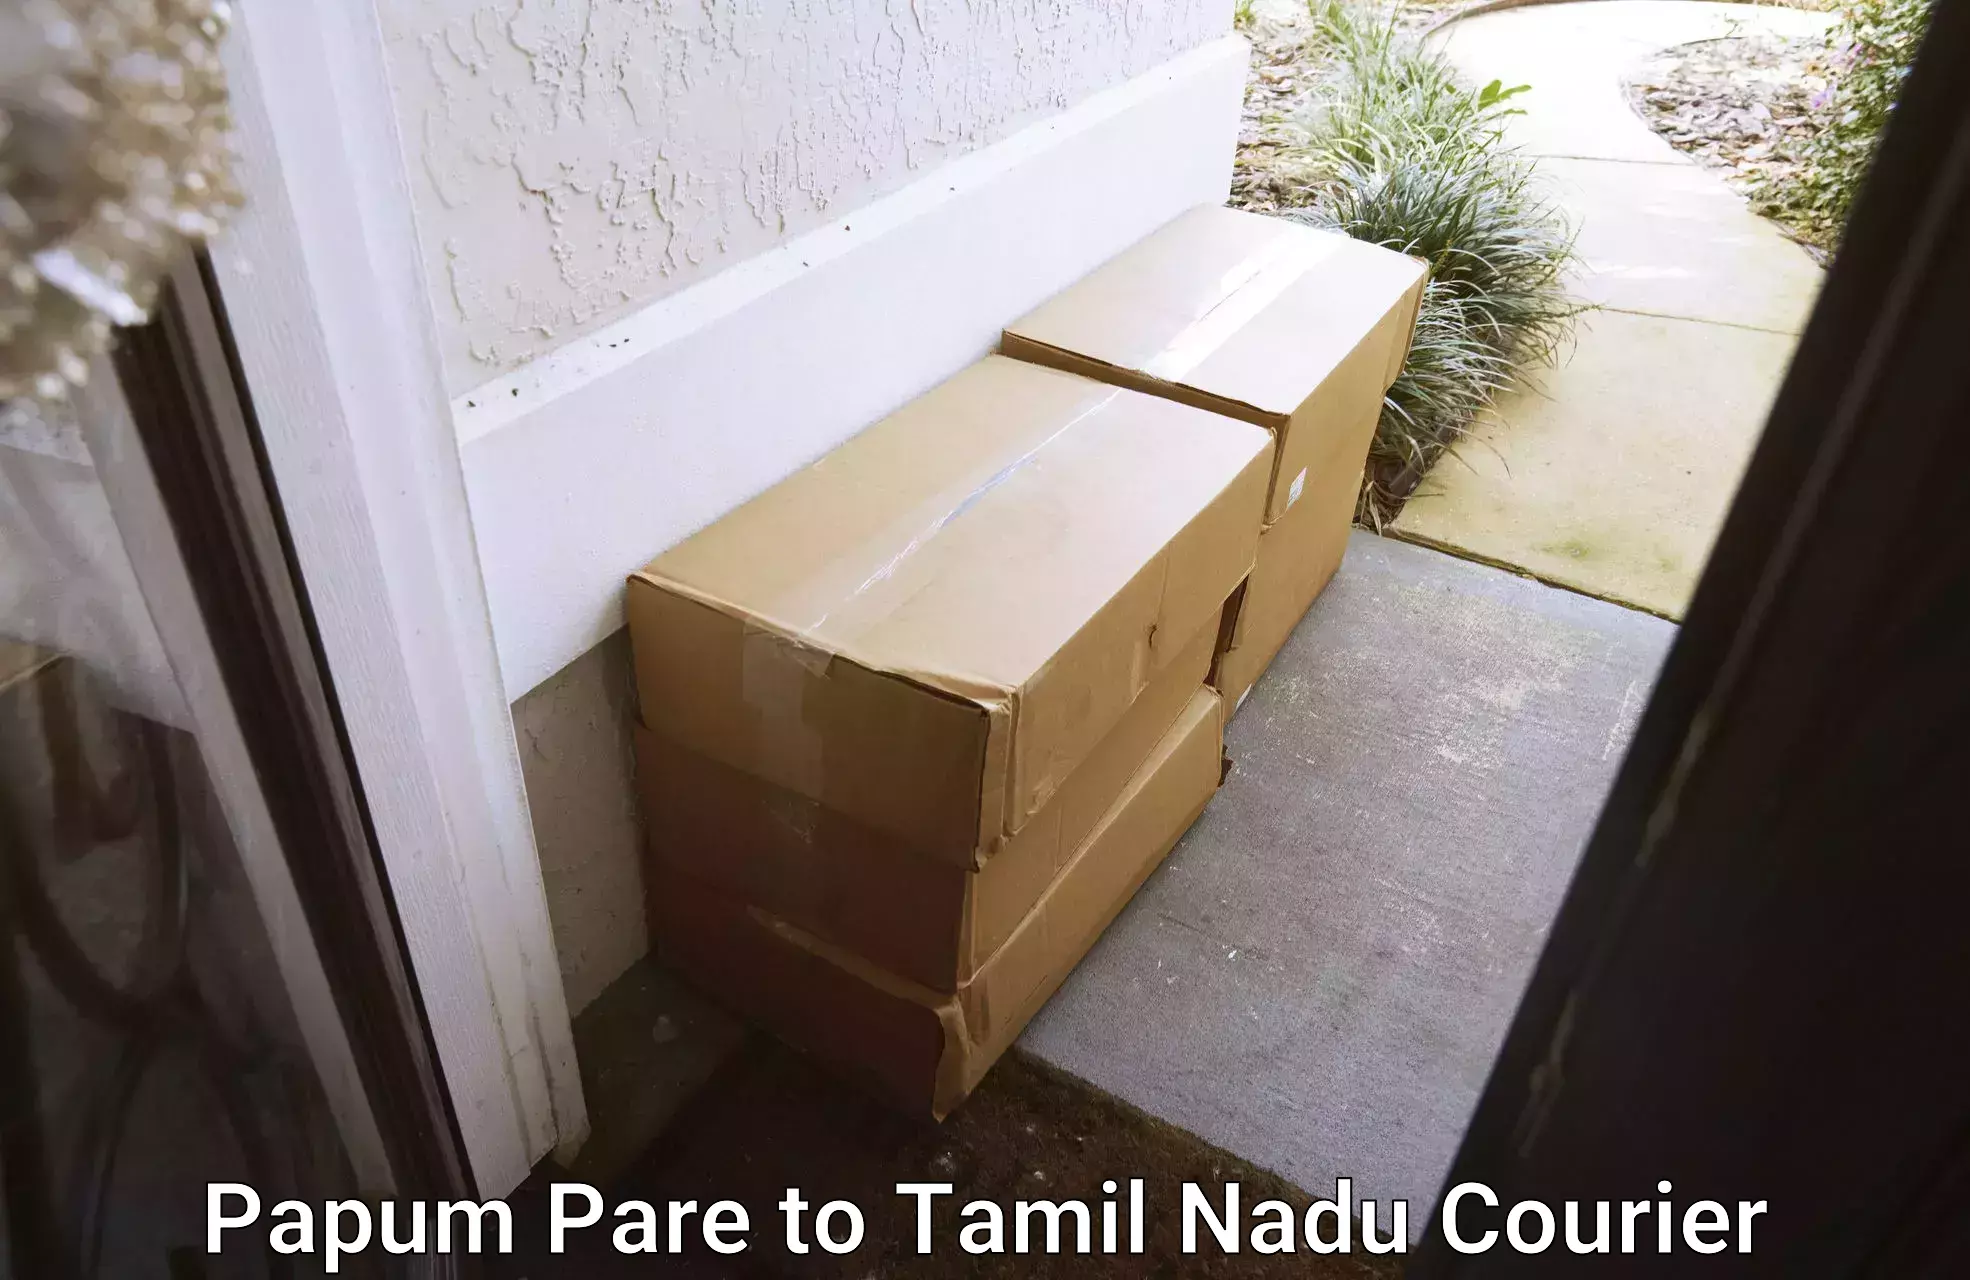 Optimized delivery routes Papum Pare to Tamil Nadu